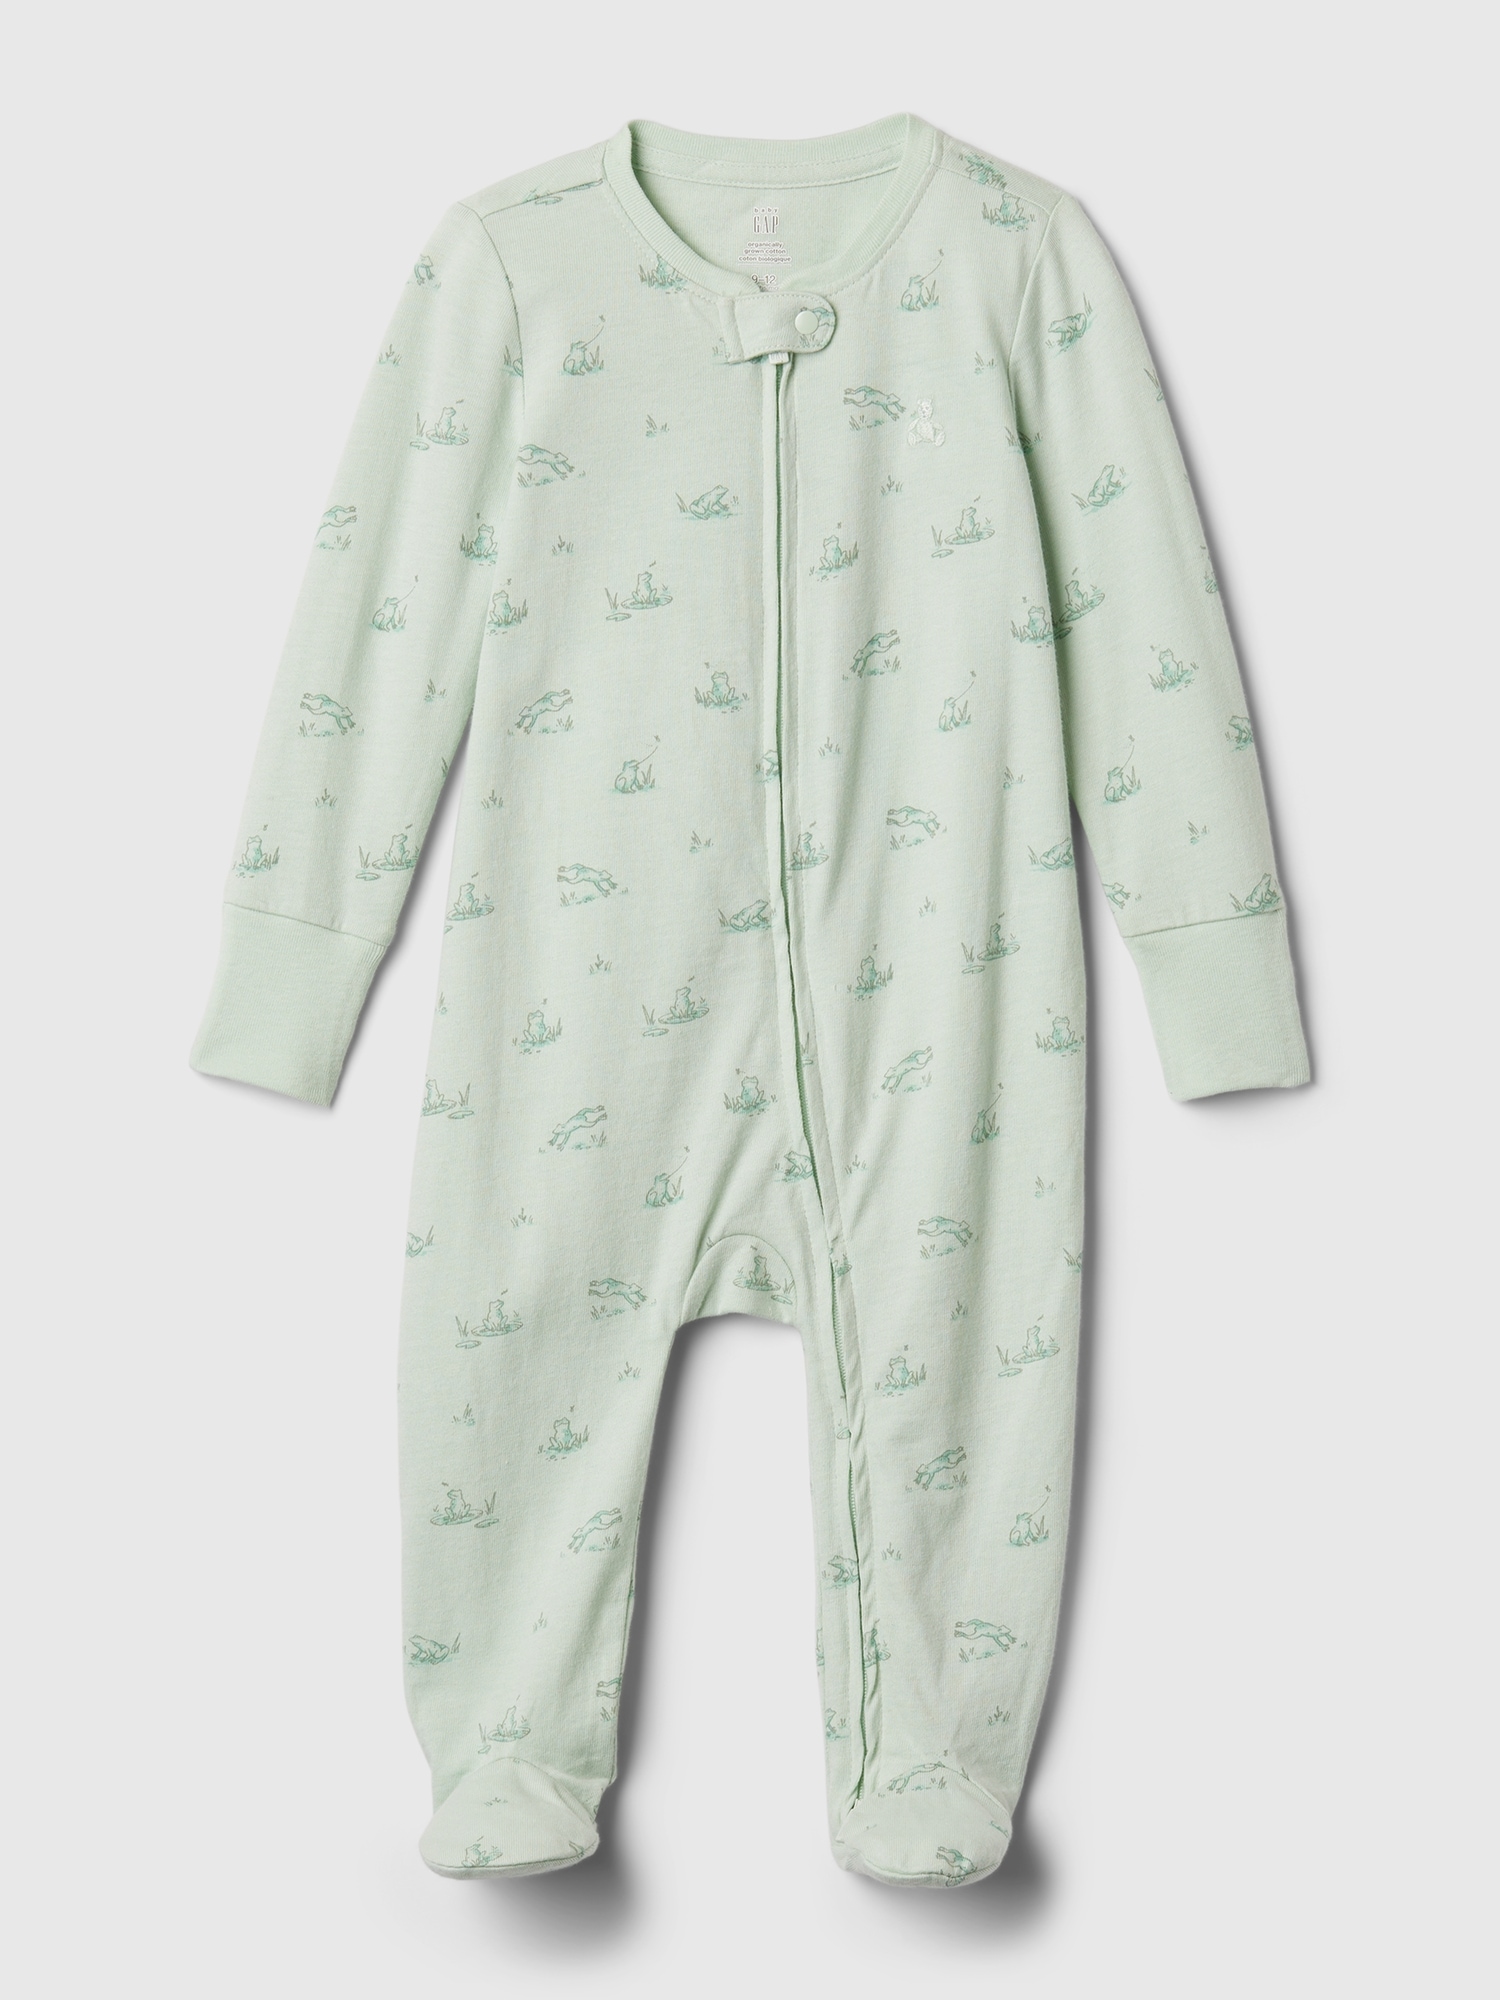 Gap Kids' Baby First Favorites Graphic One-piece In Soft Mint Green